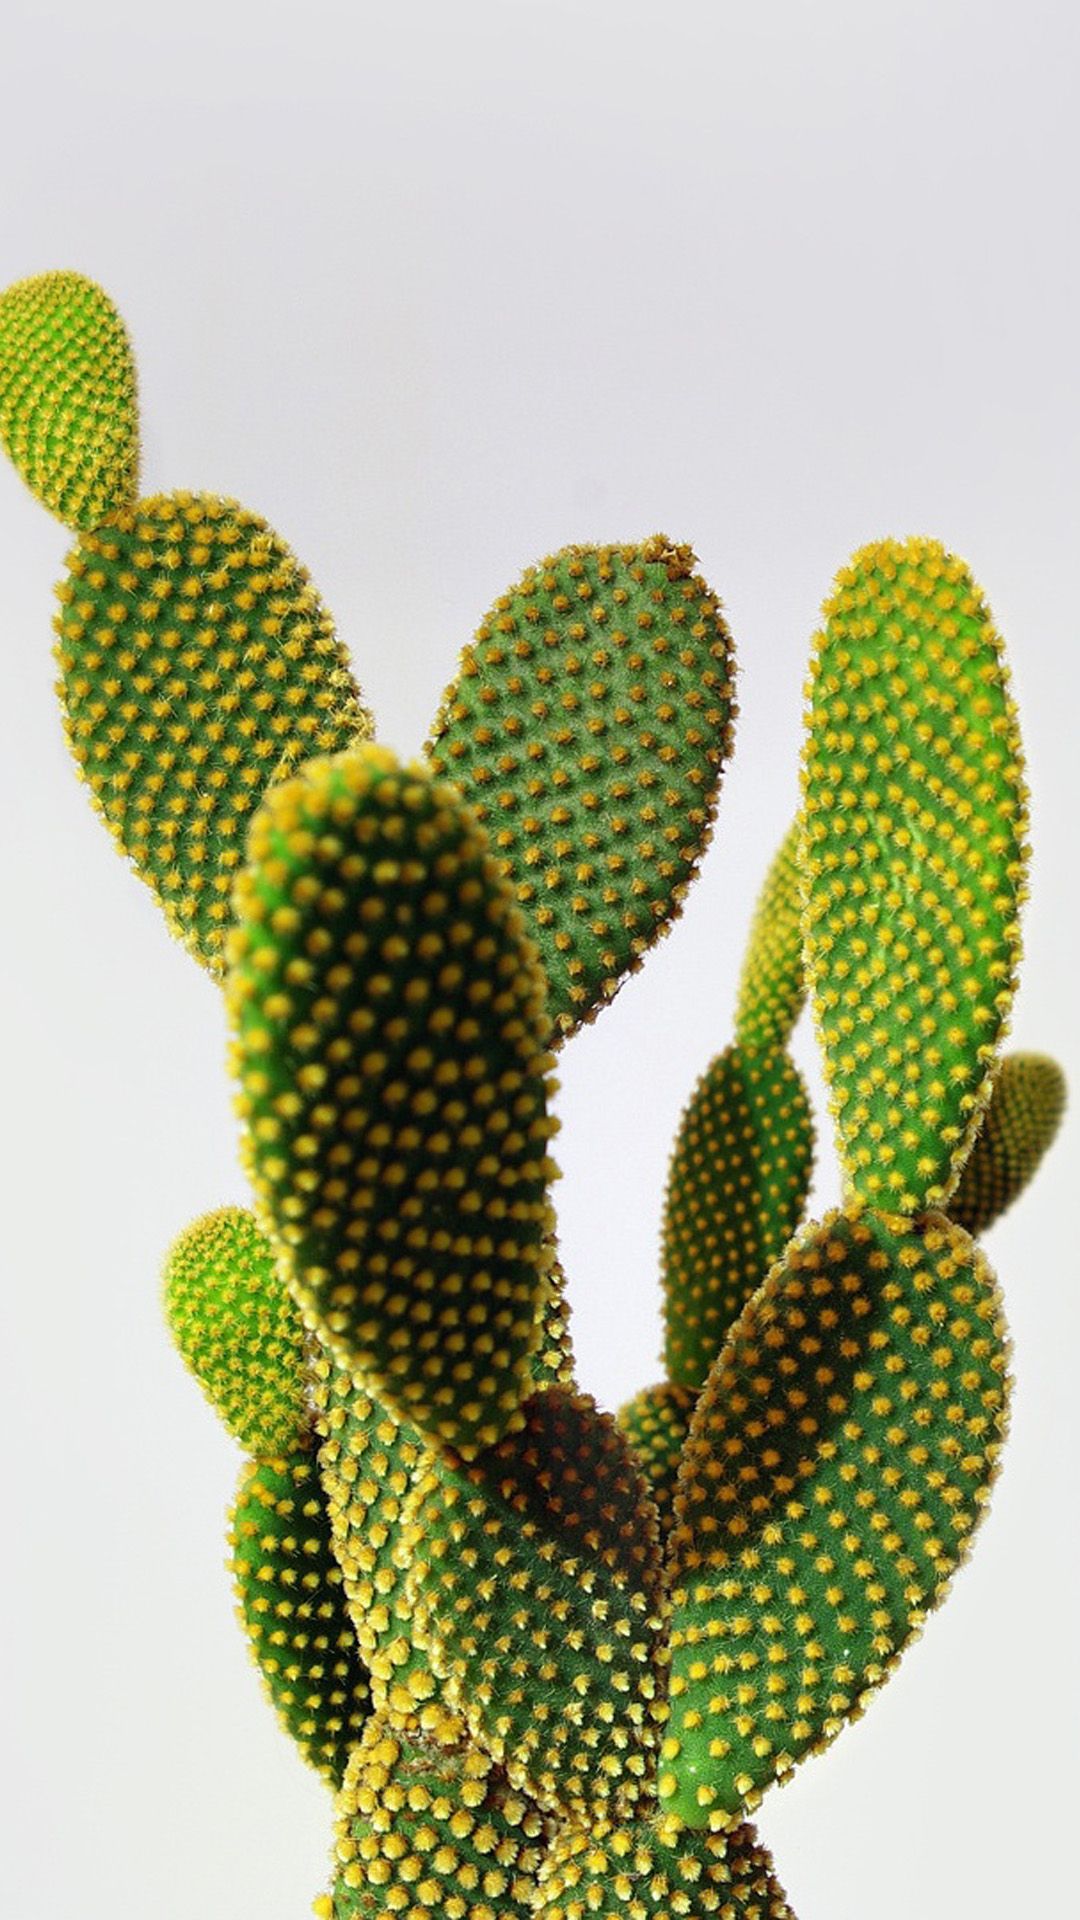 Cactus landscape Download Free Wallpaper for iPhone 6